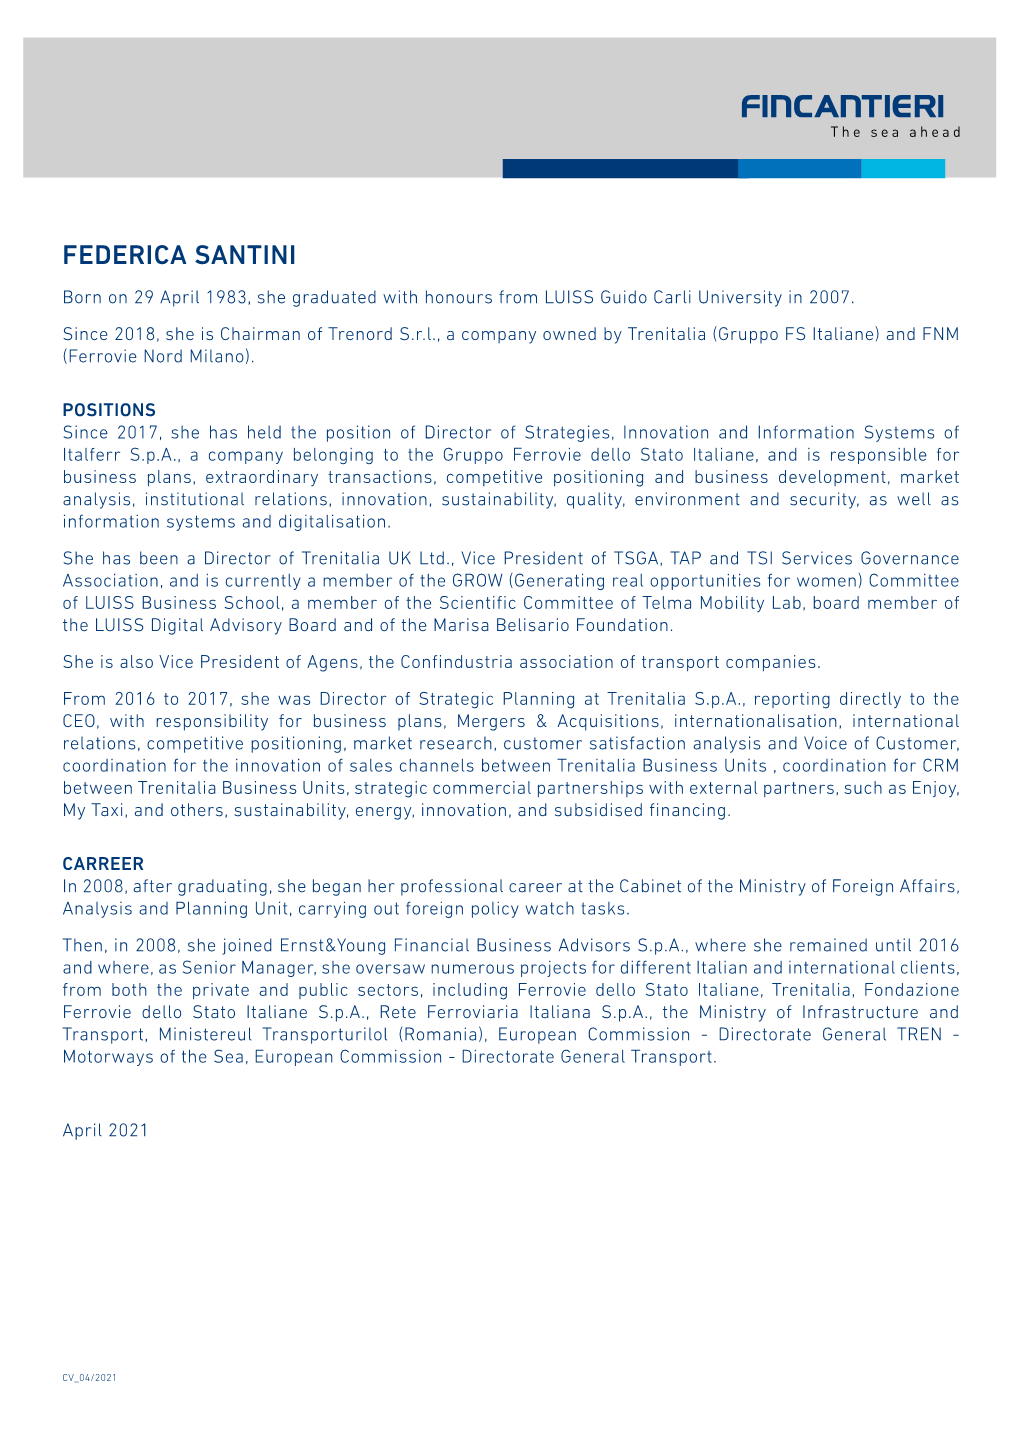 FEDERICA SANTINI Born on 29 April 1983, She Graduated with Honours from LUISS Guido Carli University in 2007